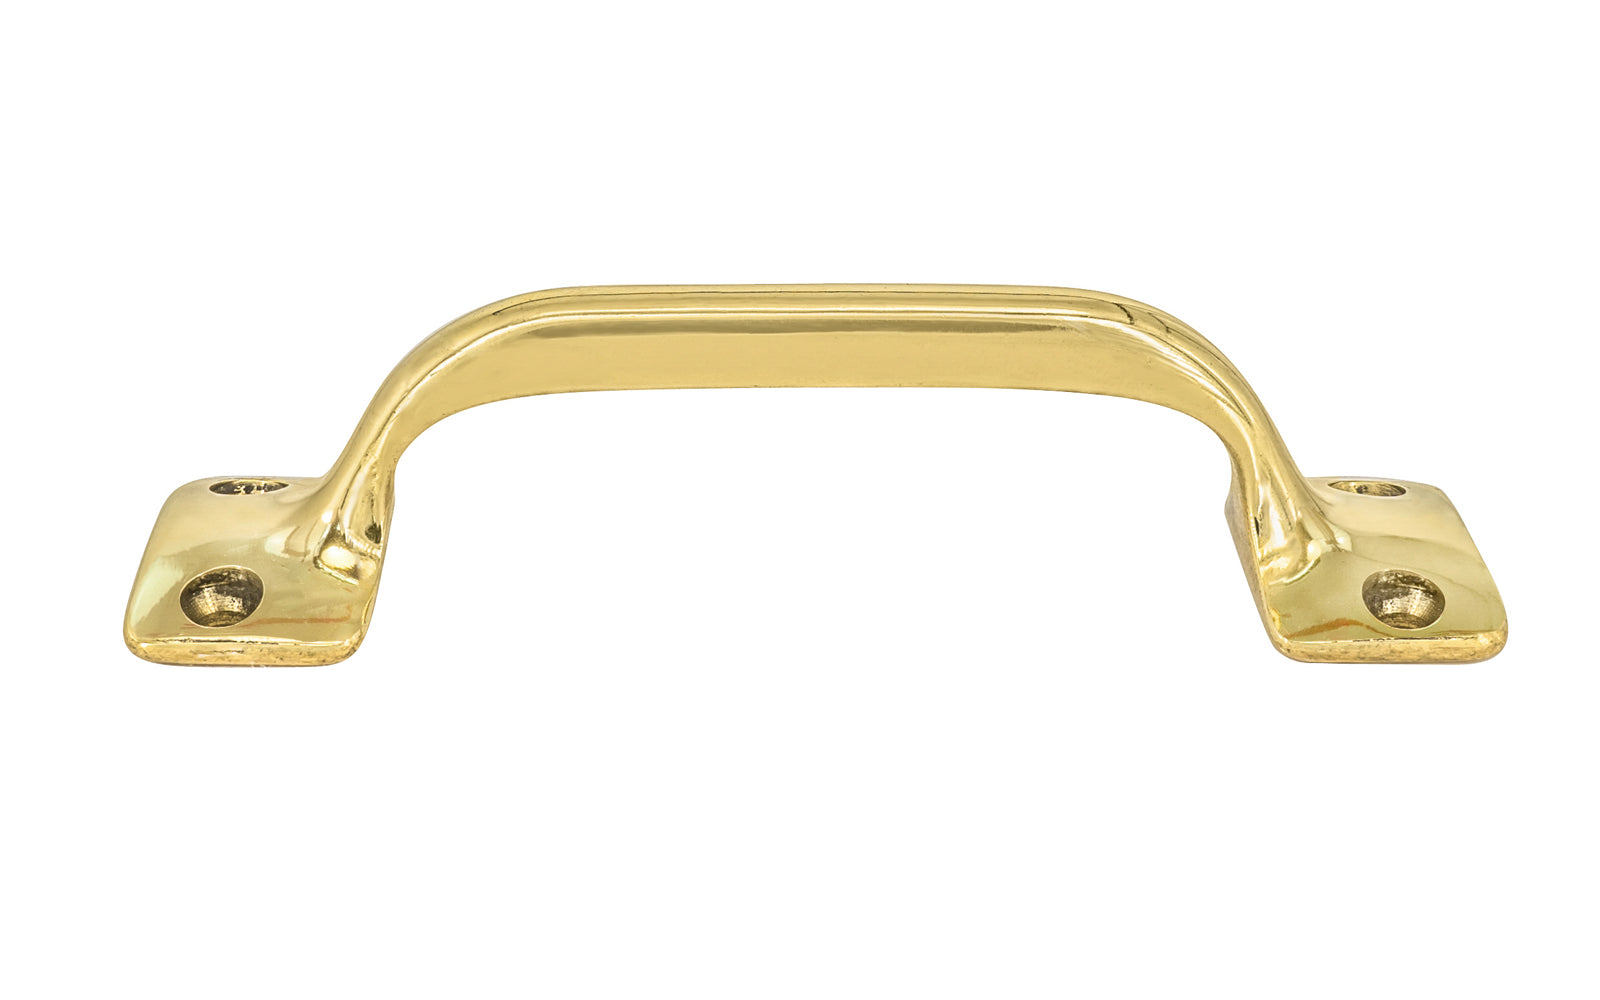 Vintage-style Hardware · Classic Solid Brass Handle Pull ~ 3-1/2" On Centers. Versatile handle is great for sash windows, cabinets, drawers, file cabinets. Arts & Crafts handle pull. Lacquered Brass Finish.